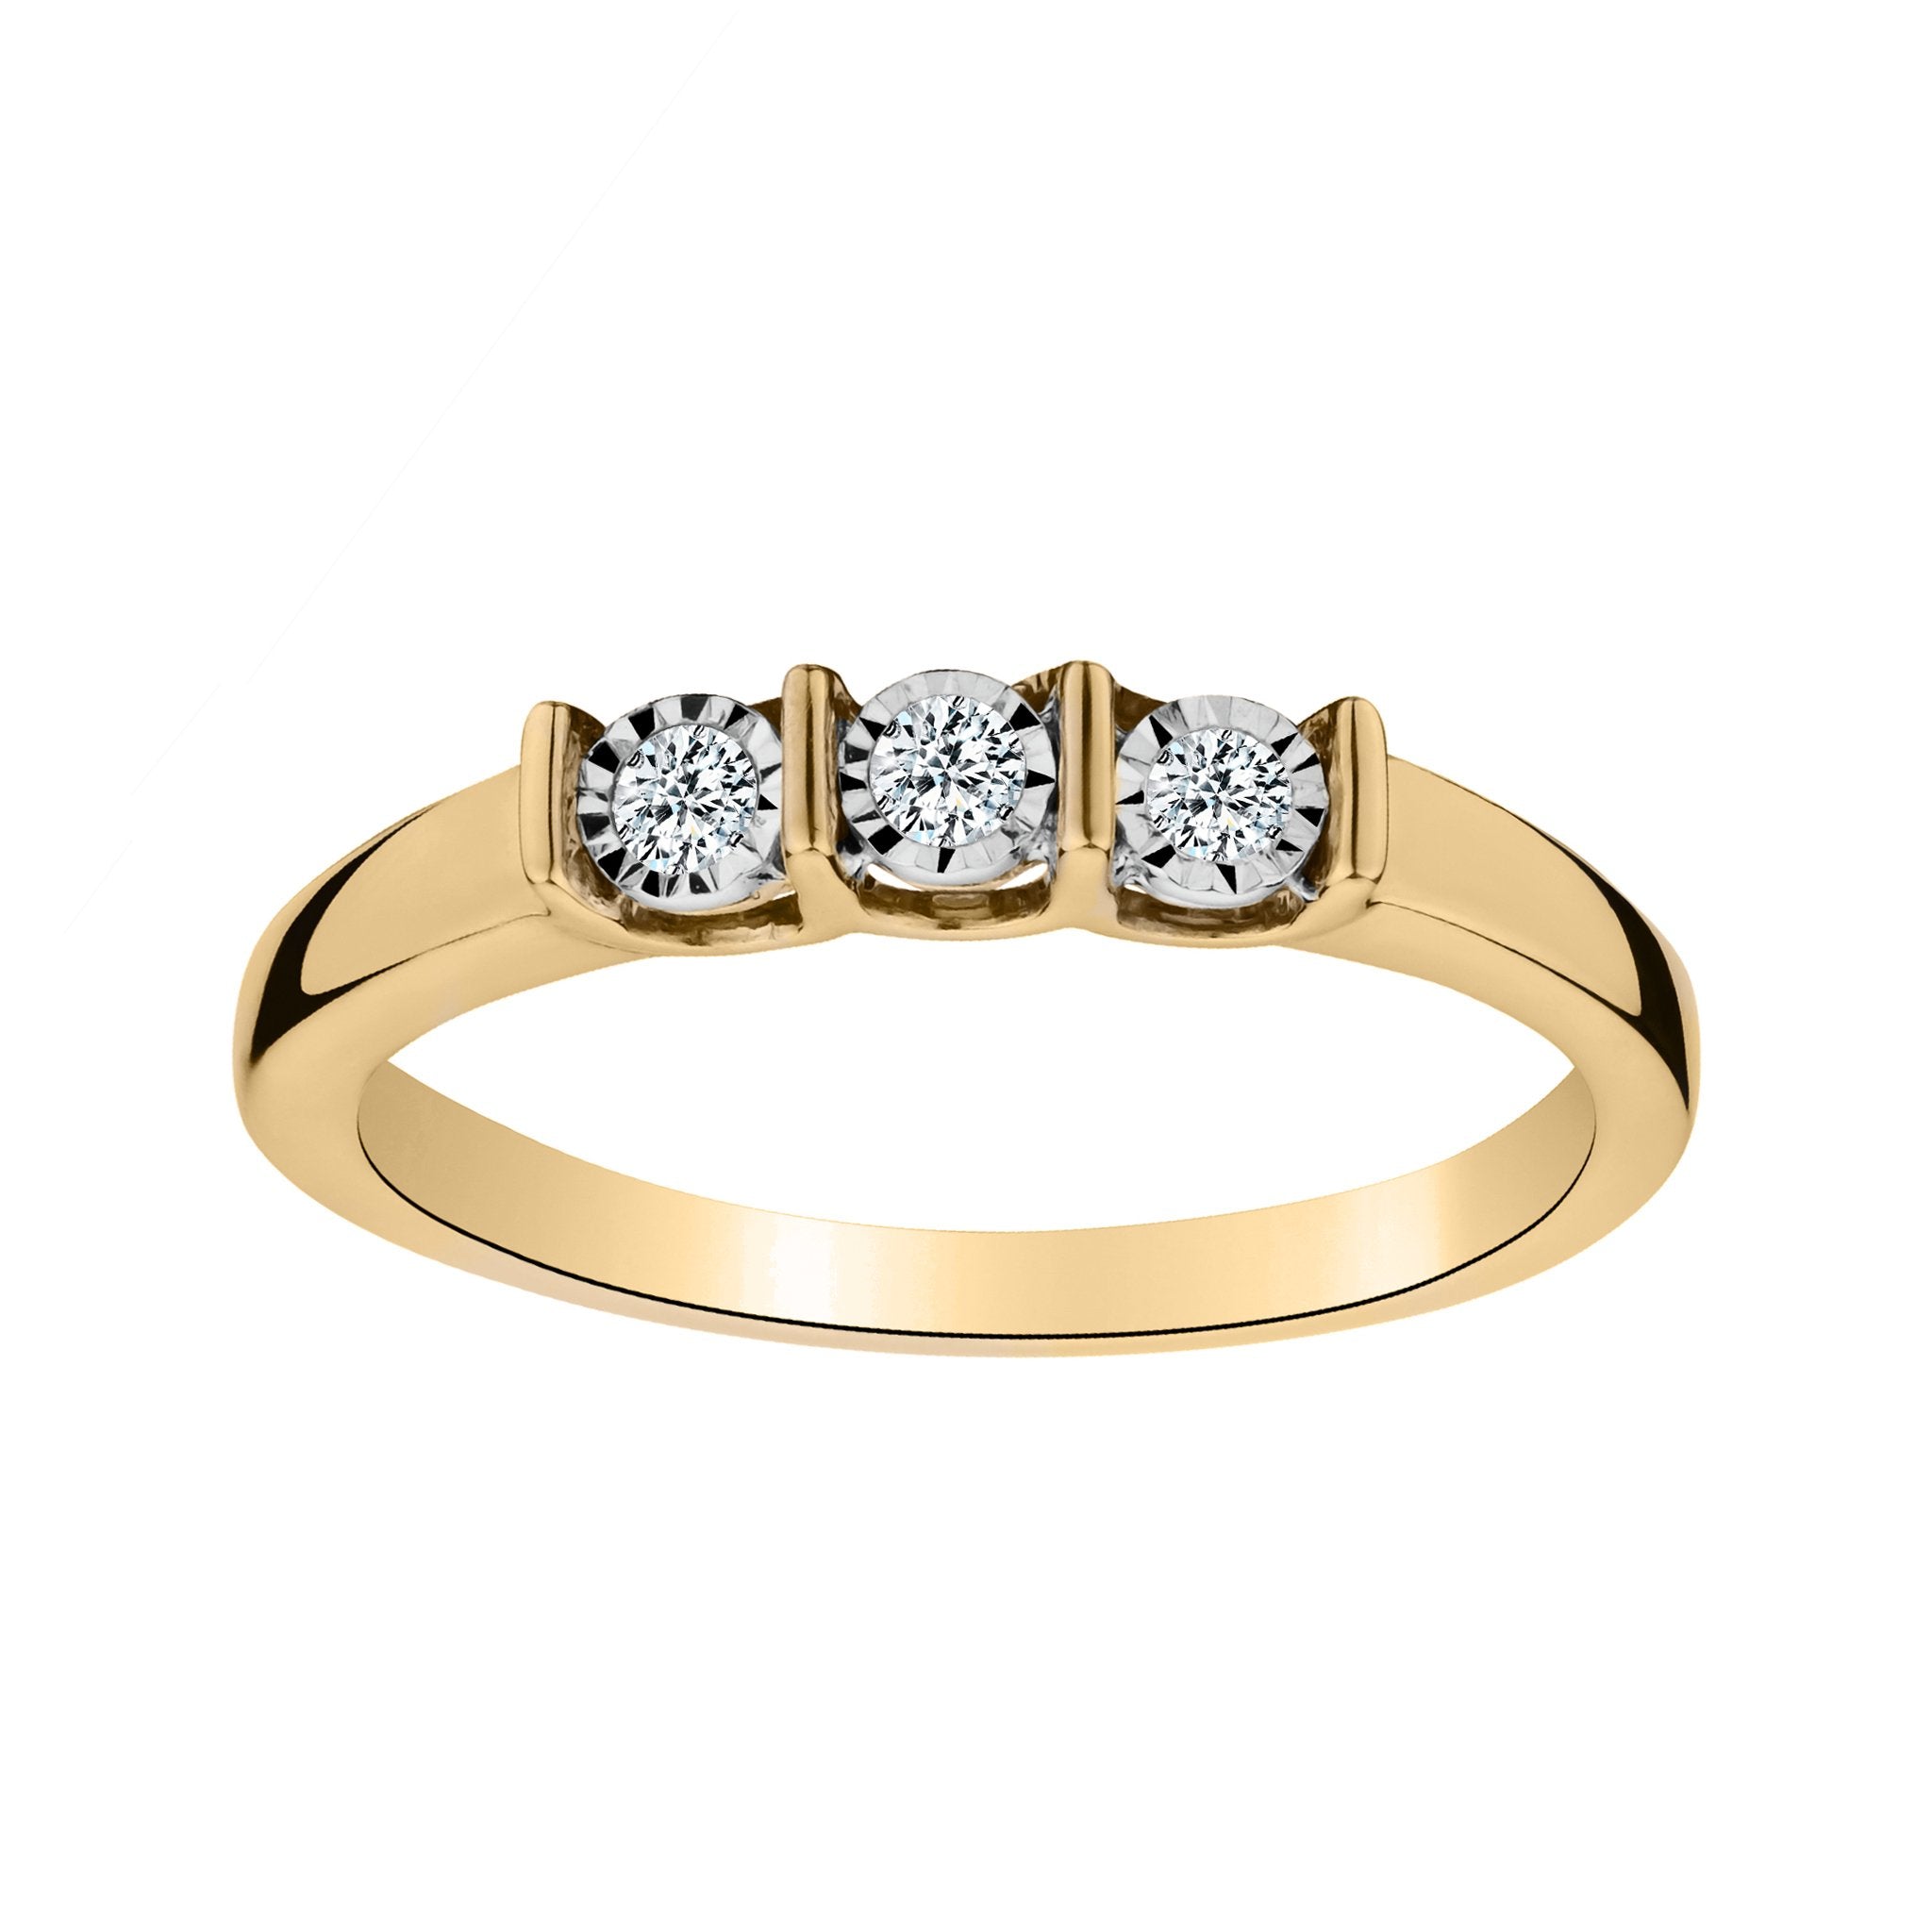 .10 CARAT "PAST, PRESENT, FUTURE" DIAMOND RING. 10kt YELLOW GOLD…...................NOW - Griffin Jewellery Designs